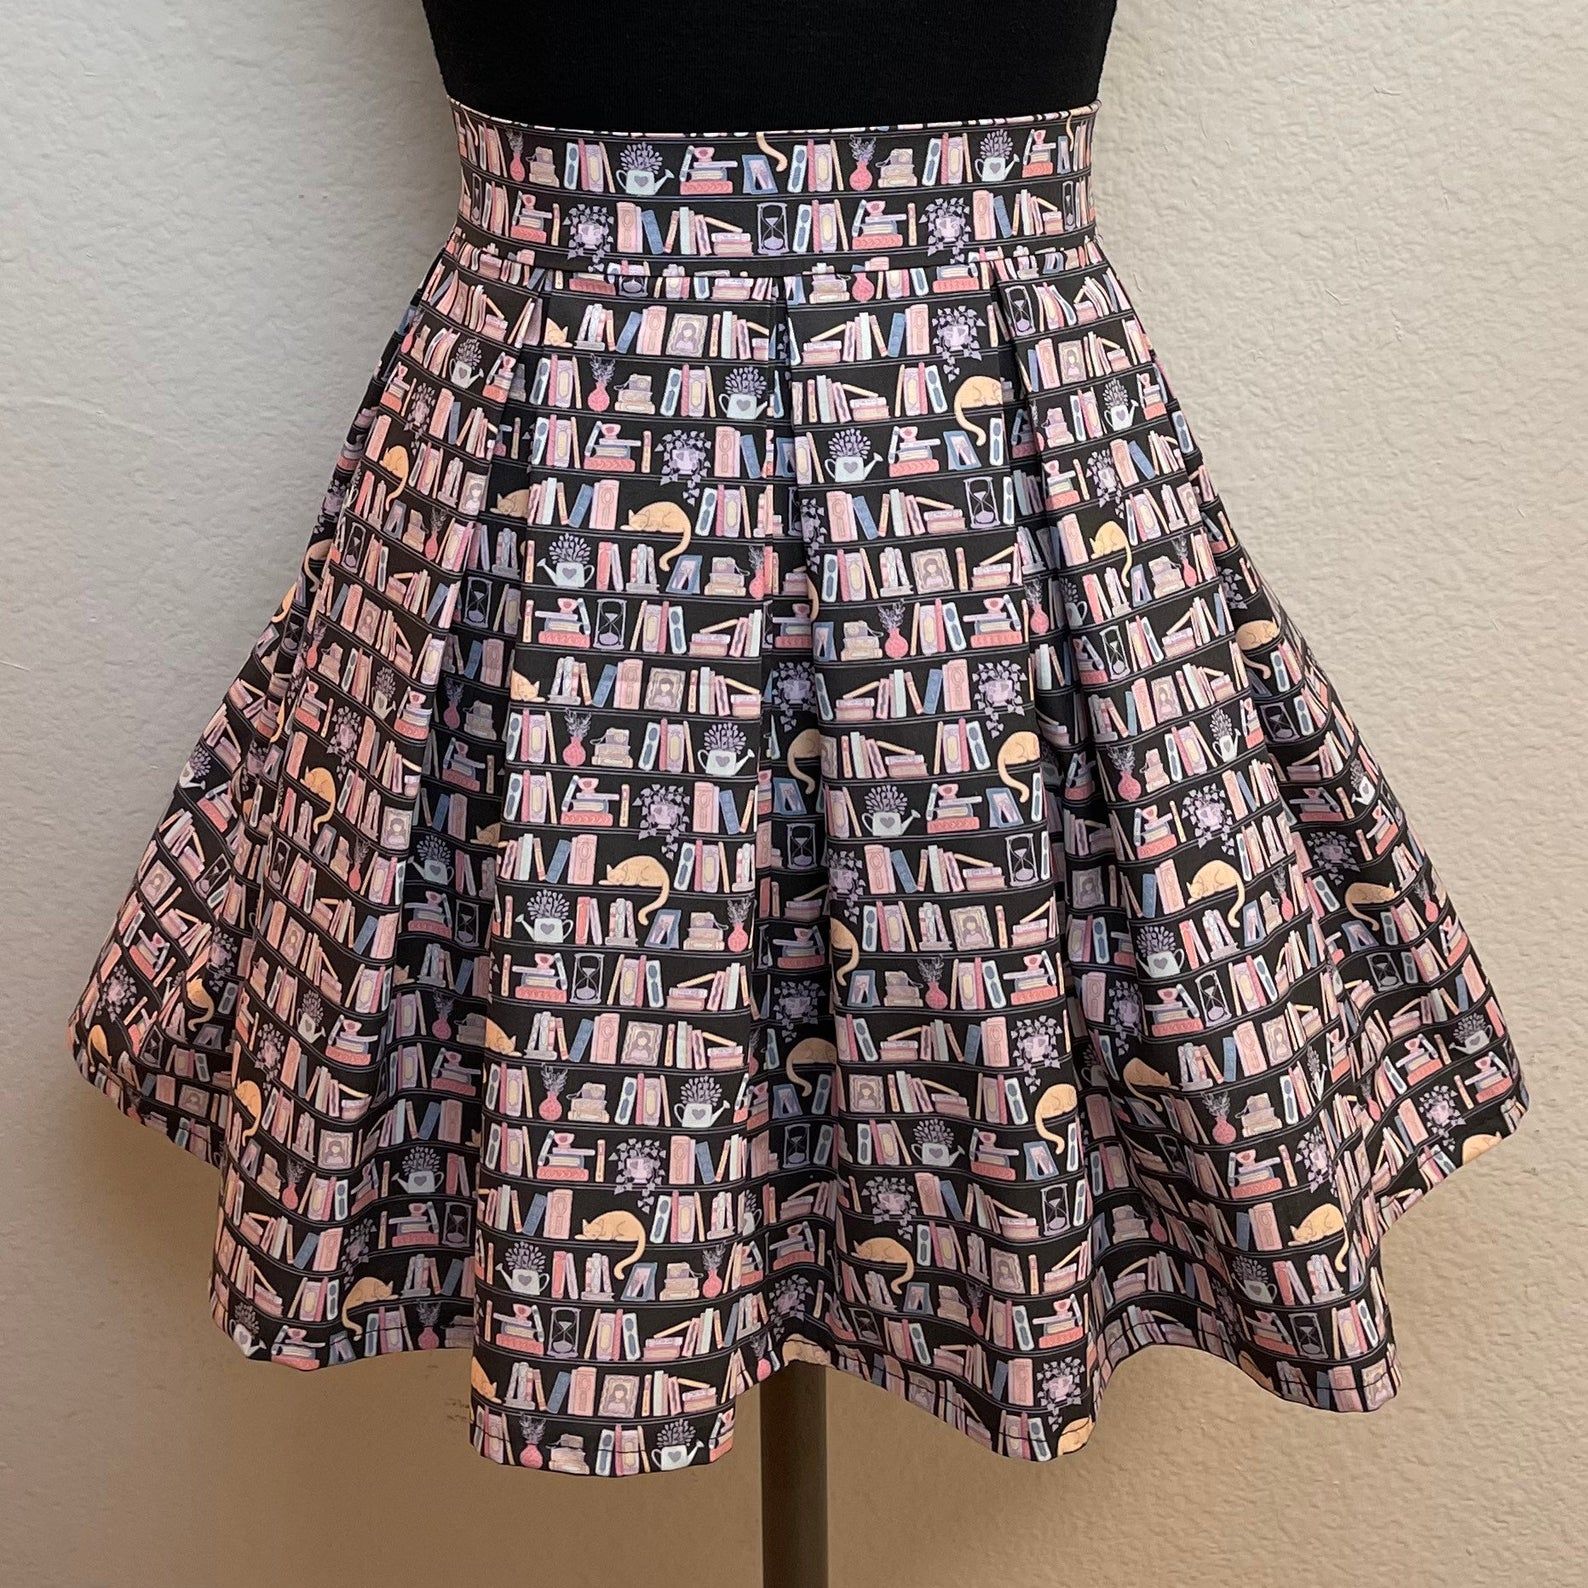 Black skirt decorated with a motif of pink books, plants, and cats.